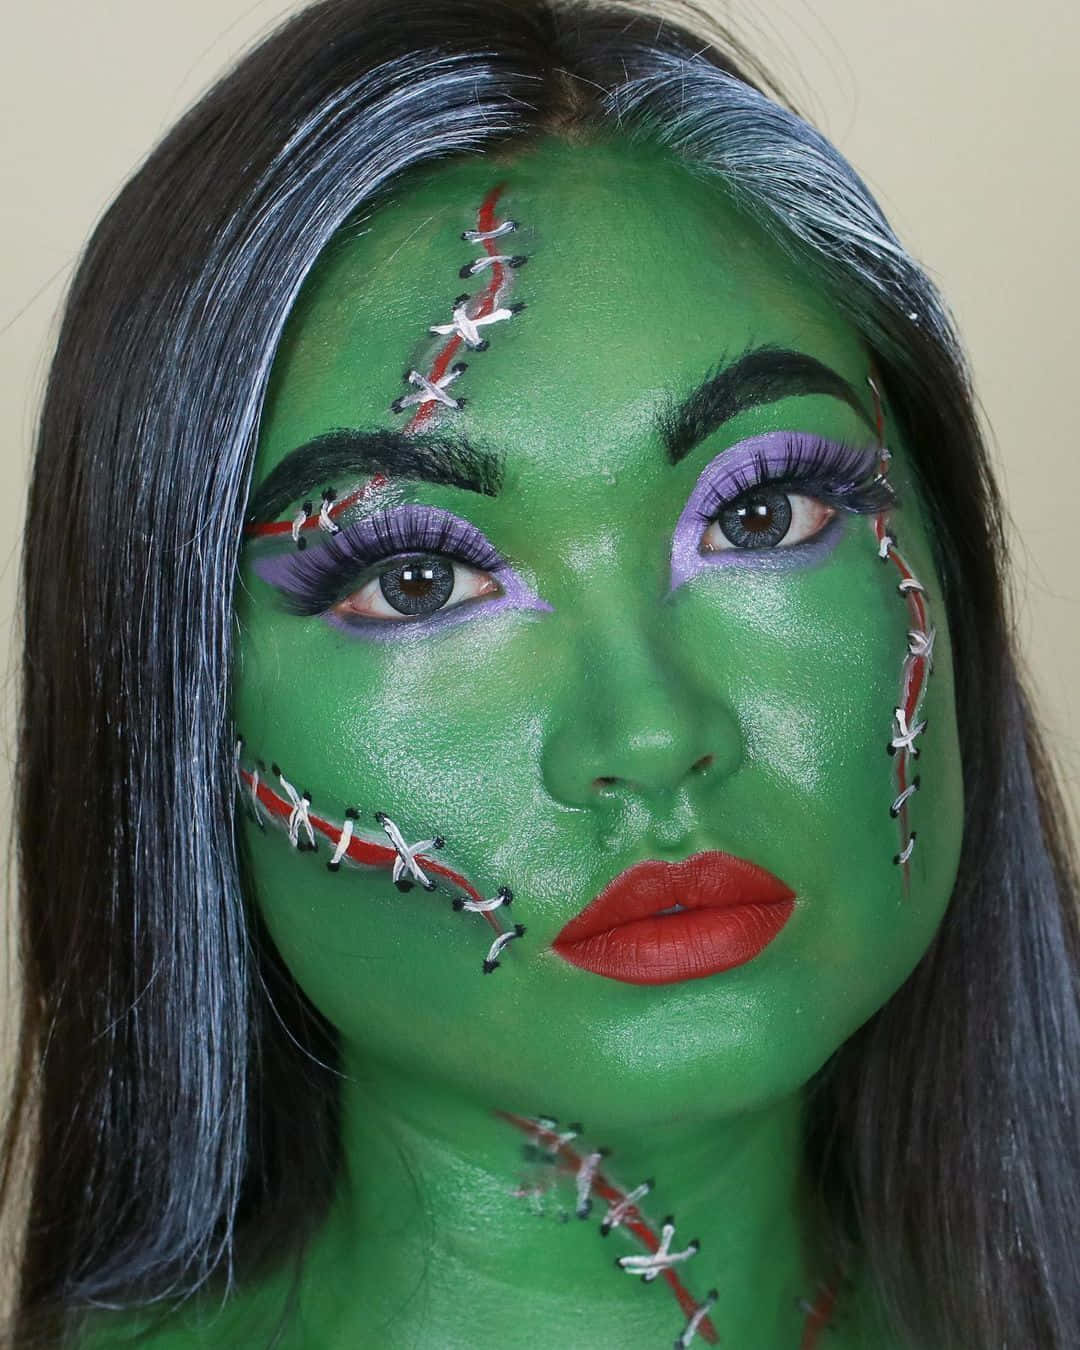 “Frighteningly Good: Get Creative With Your Halloween Makeup this Year” Wallpaper